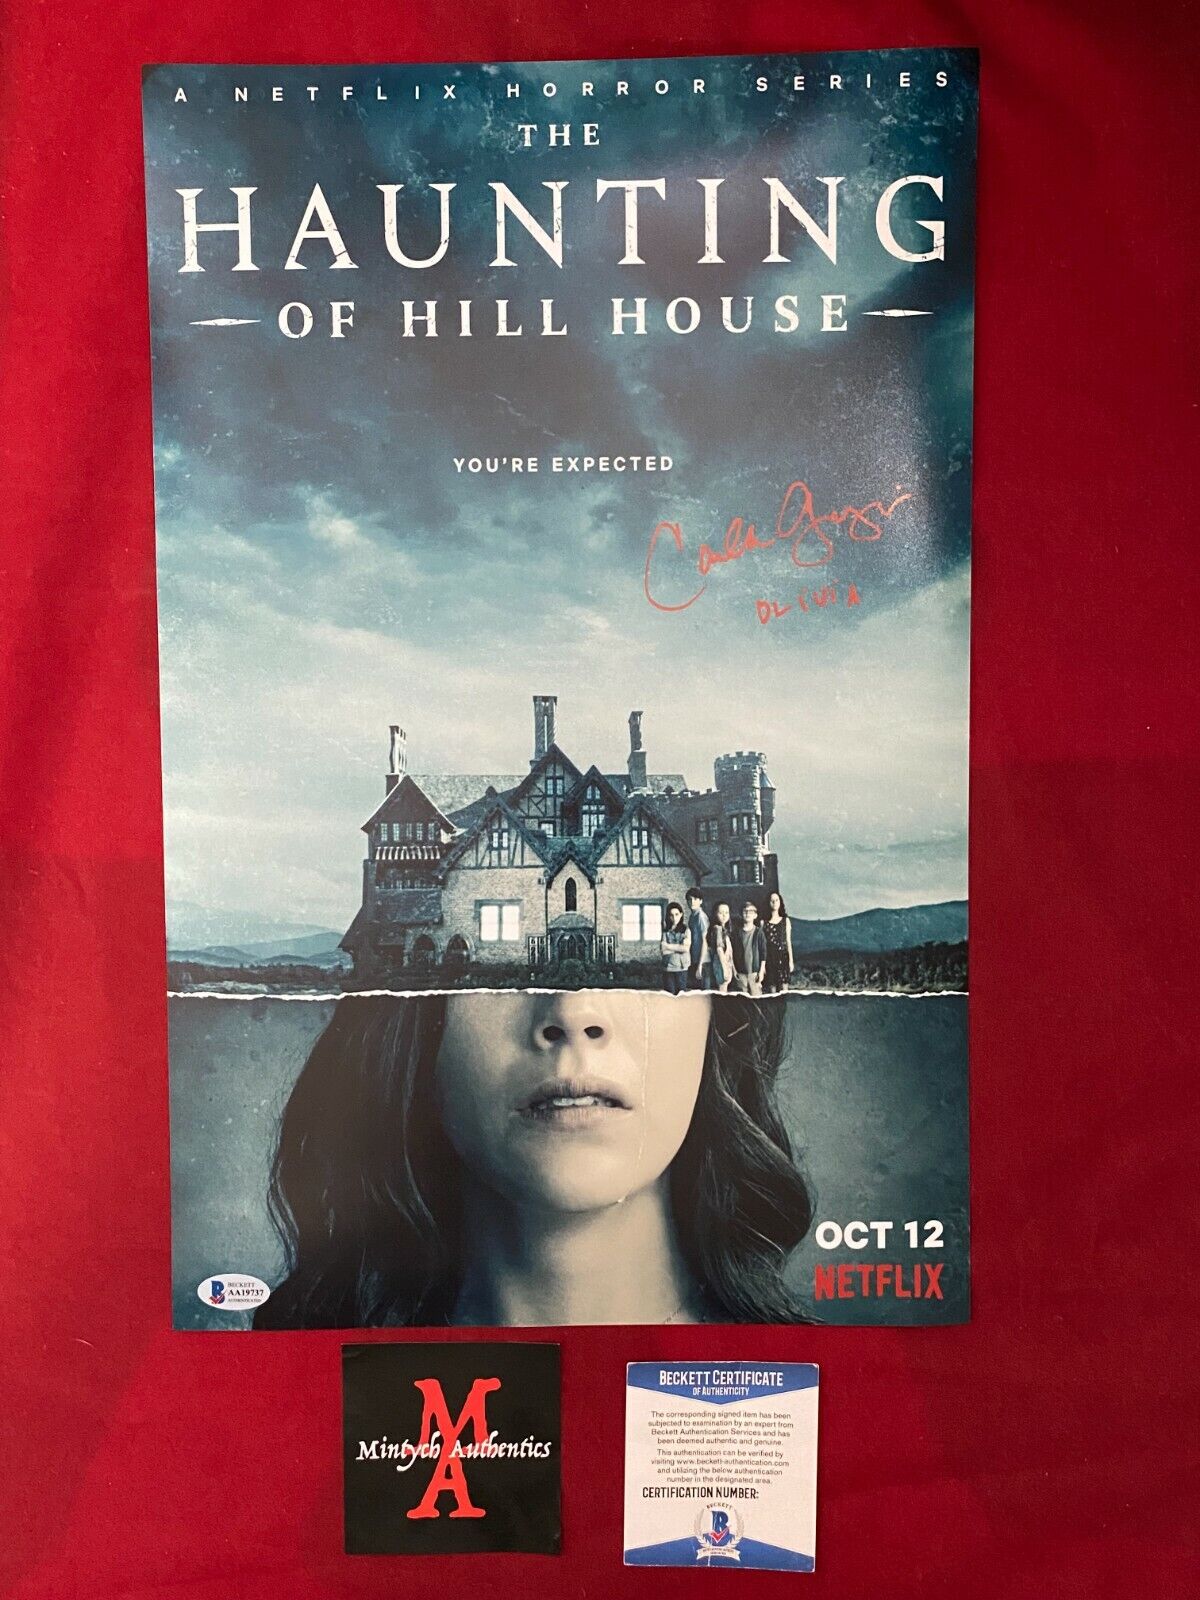 CARLA GUGINO AUTOGRAPHED SIGNED 11x17 Photo Poster painting! THE HAUNTING OF HILL HOUSE! BECKETT